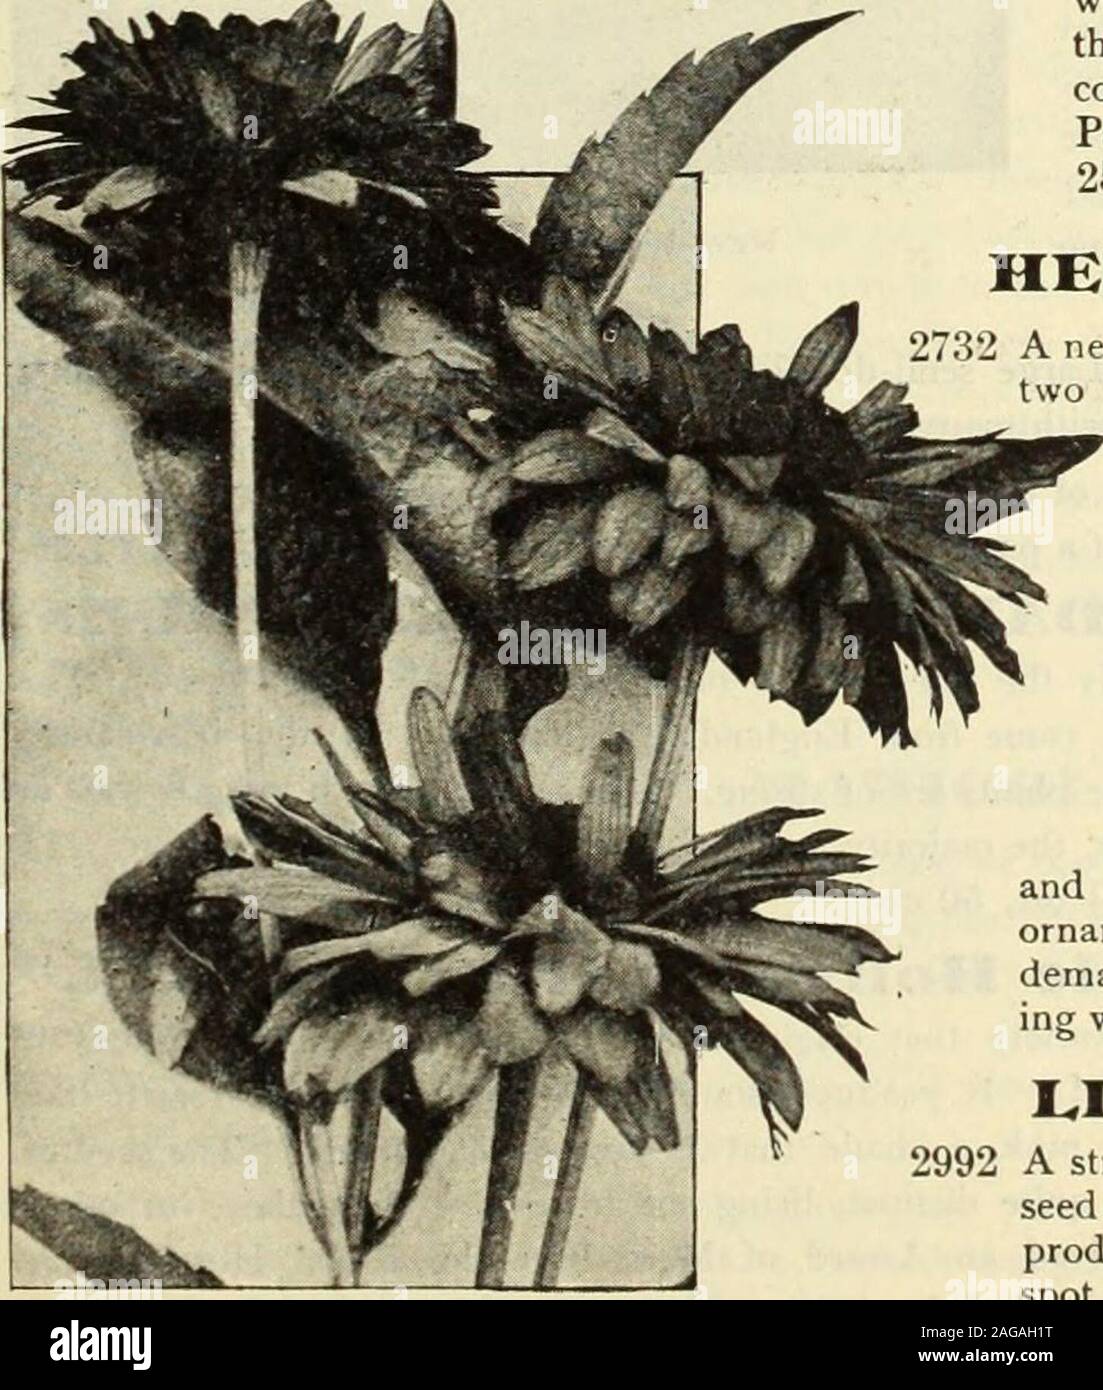 . Dreer's 1913 garden book. Pknnisetum Japonicum (Hardy Fountain Grass). iHfflKTADRfER-PHIIADtLPHIAfA^TlOWERSEED{fOVEbTWlM 63 T^m. mmm if*grz ,&gt; »&lt; t If JC^ THE W-- i. CARDINALCLIMBER. Ipomoea Quacnoclit Hybrida.) 2158 We introduced this sensational novelty-v^ last year, and wherever grown it has created a furore, and no plant in ourtrial grounds the past season was somuch admired. We consider it themost beautiful, brilliant and distinctannual climber introduced in manyyears. It is the result of a cross betweenIpomoea Quamoclit, the Cypress Vineand Ipomoea Coccinea.or Star Glory. Itis a Stock Photo